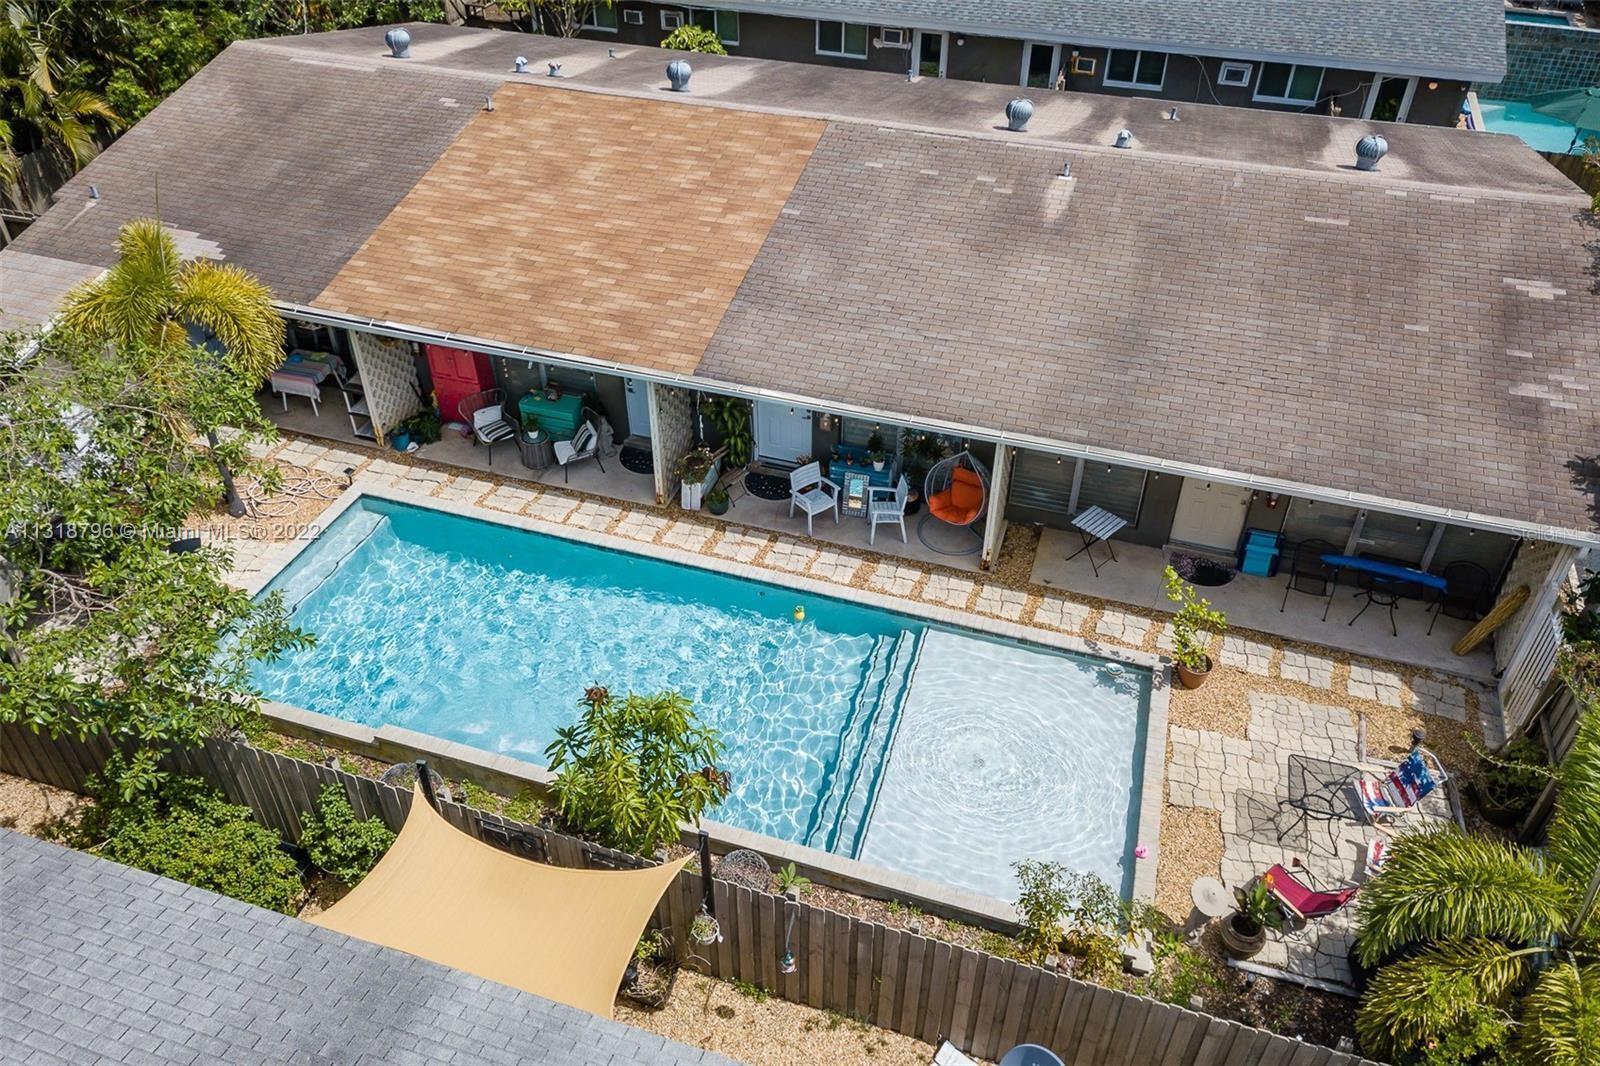 Amazing 4-plex opportunity complete with a community pool. Each unit has a front patio, overlooking 